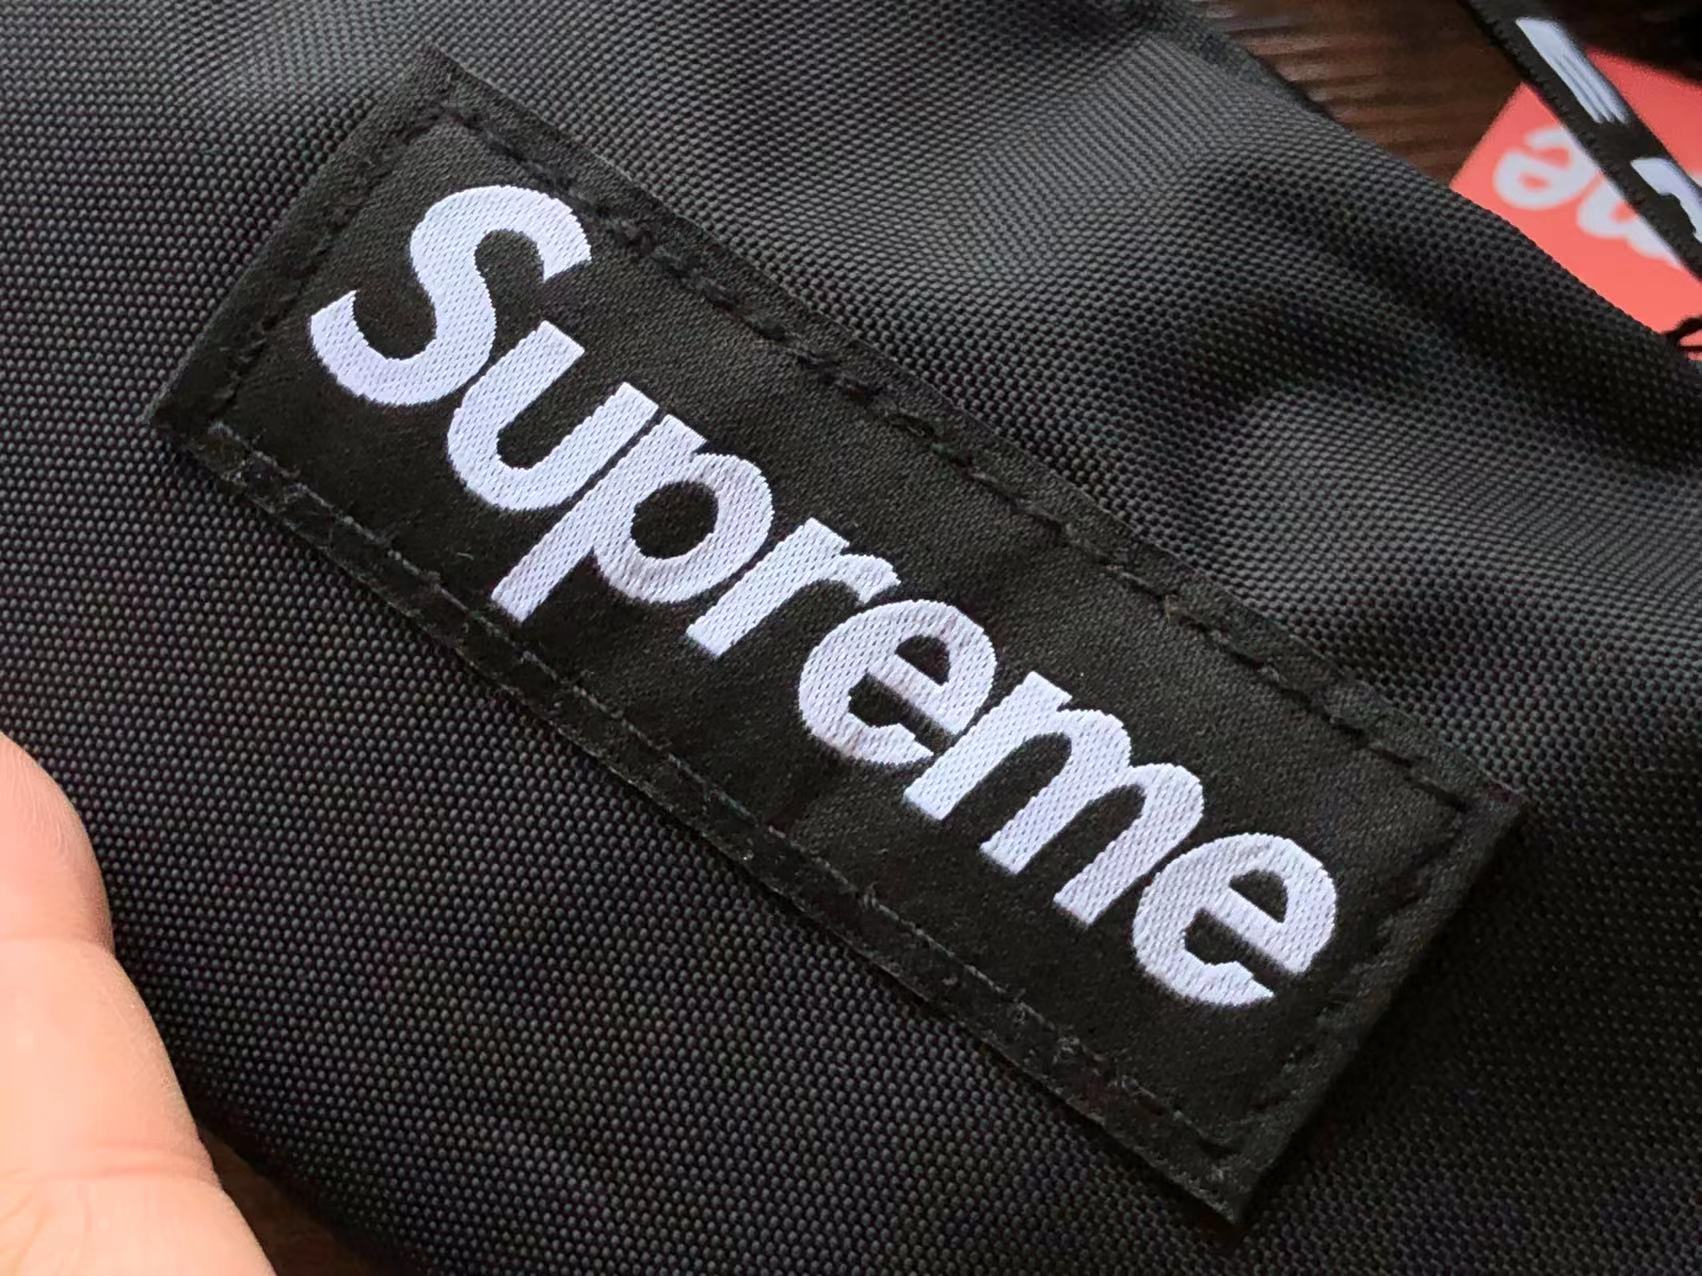 🔥supreme small waist bag Olive Green fw22 100% Authentic